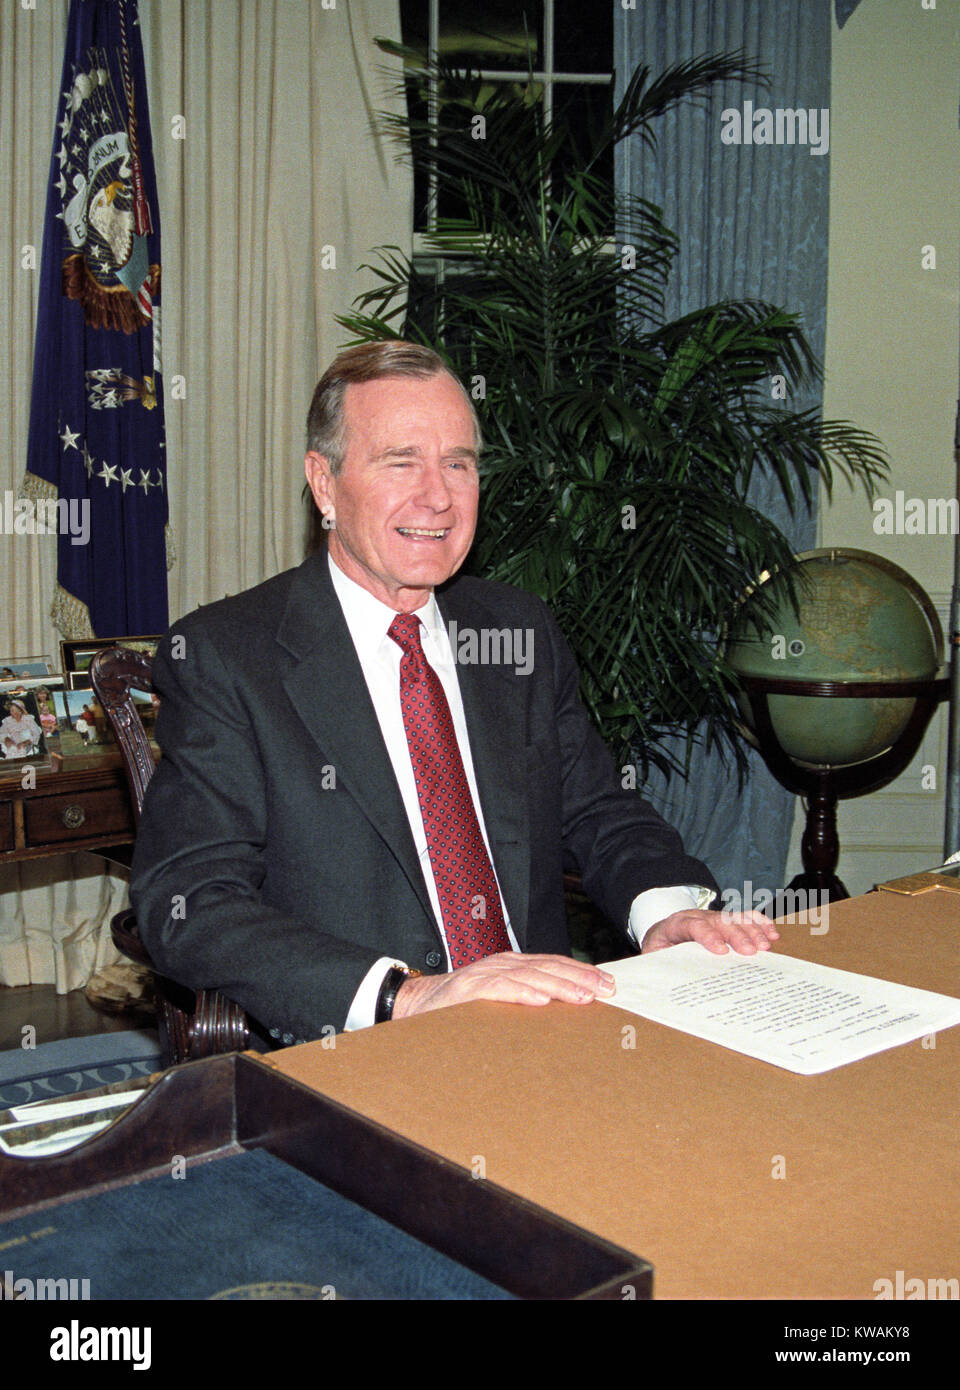 United States President George H.W. Bush poses for photographers after delivering an address to the nation from the Oval Office of the White House in Washington, DC on Christmas Day, December 25, 1991 announcing the resignation of President Mikhail Gorbachev as President of the Union of Soviet Socialist Republics, marking the collapse of the Soviet Union and the end of the Cold War. Credit: Arnie Sachs/CNP - NO WIRE SERVICE - Photo: Arnie Sachs/Consolidated/dpa Stock Photo